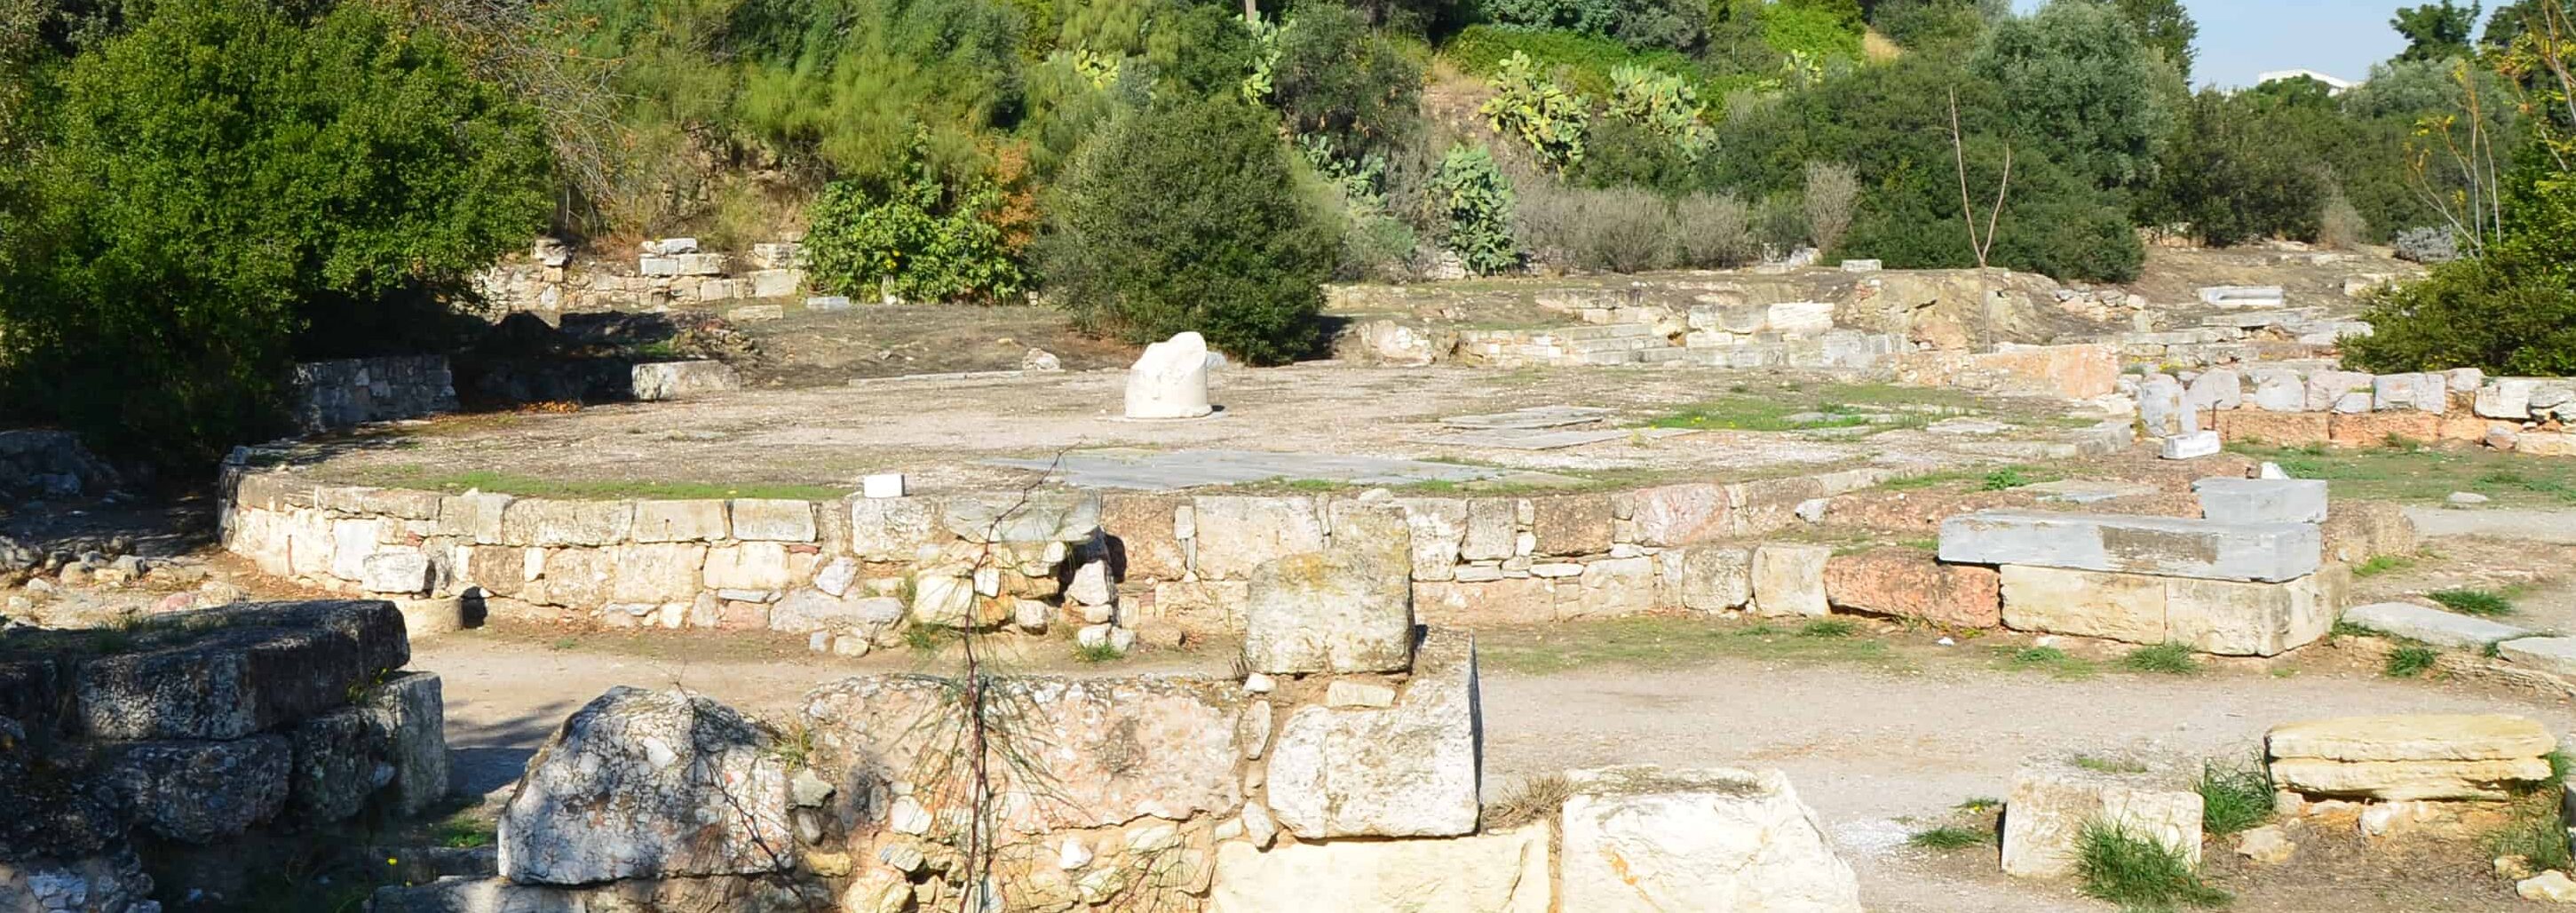 Tholos at the Agora in Athens, Greece